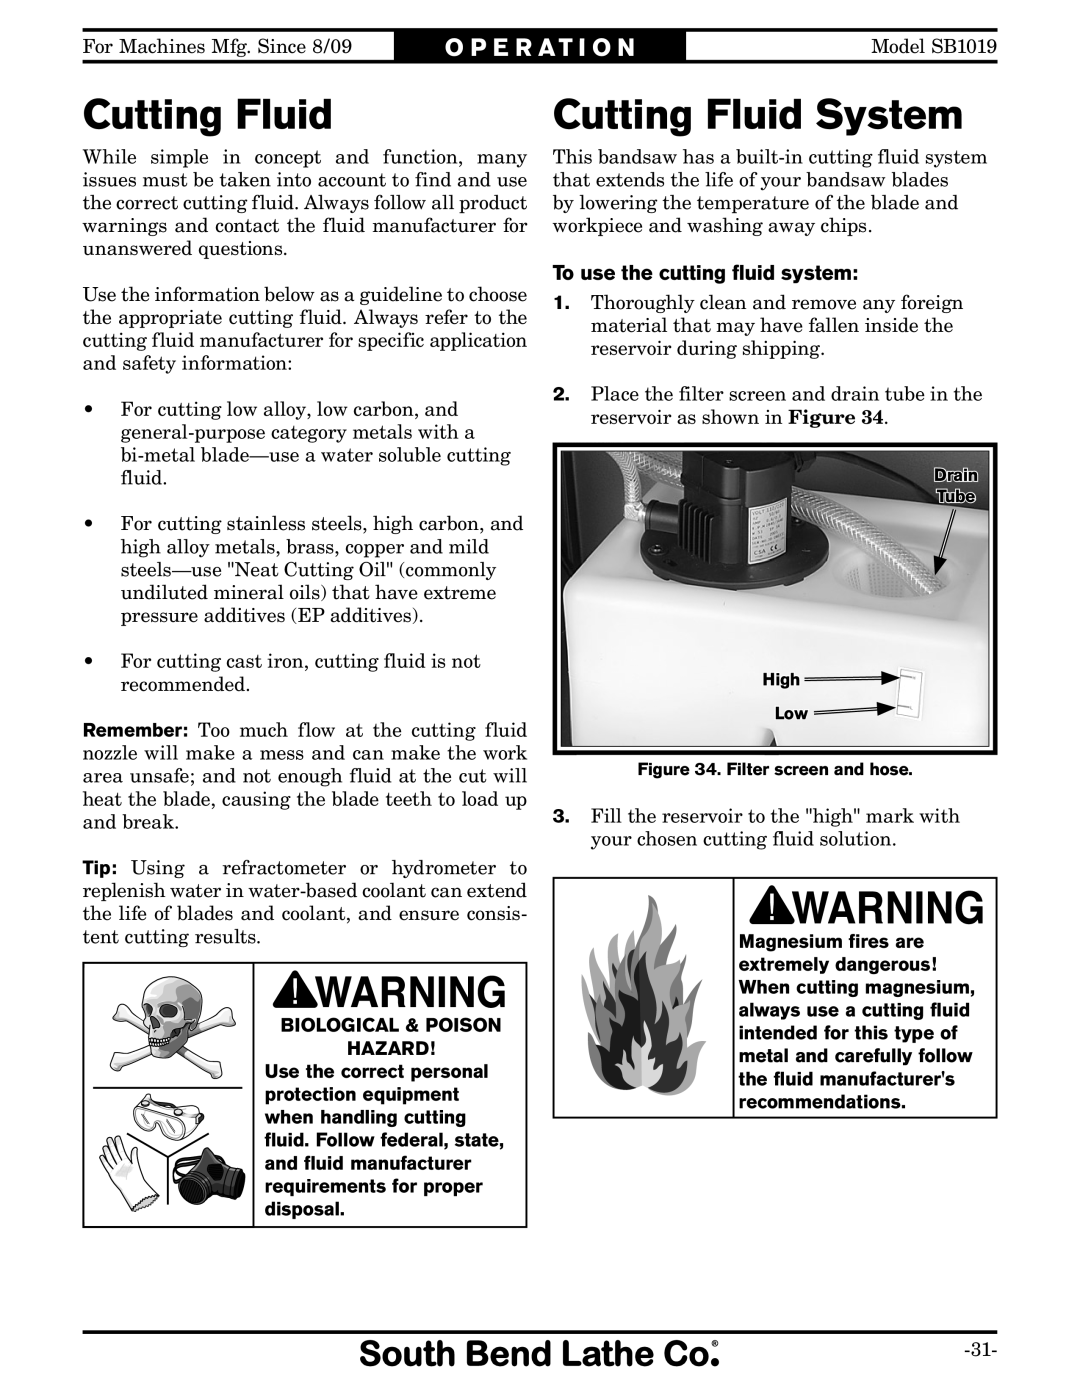 Southbend SB1019 Cutting Fluid System, To use the cutting fluid system, Biological & Poison Hazard, O P E R A T I O N 